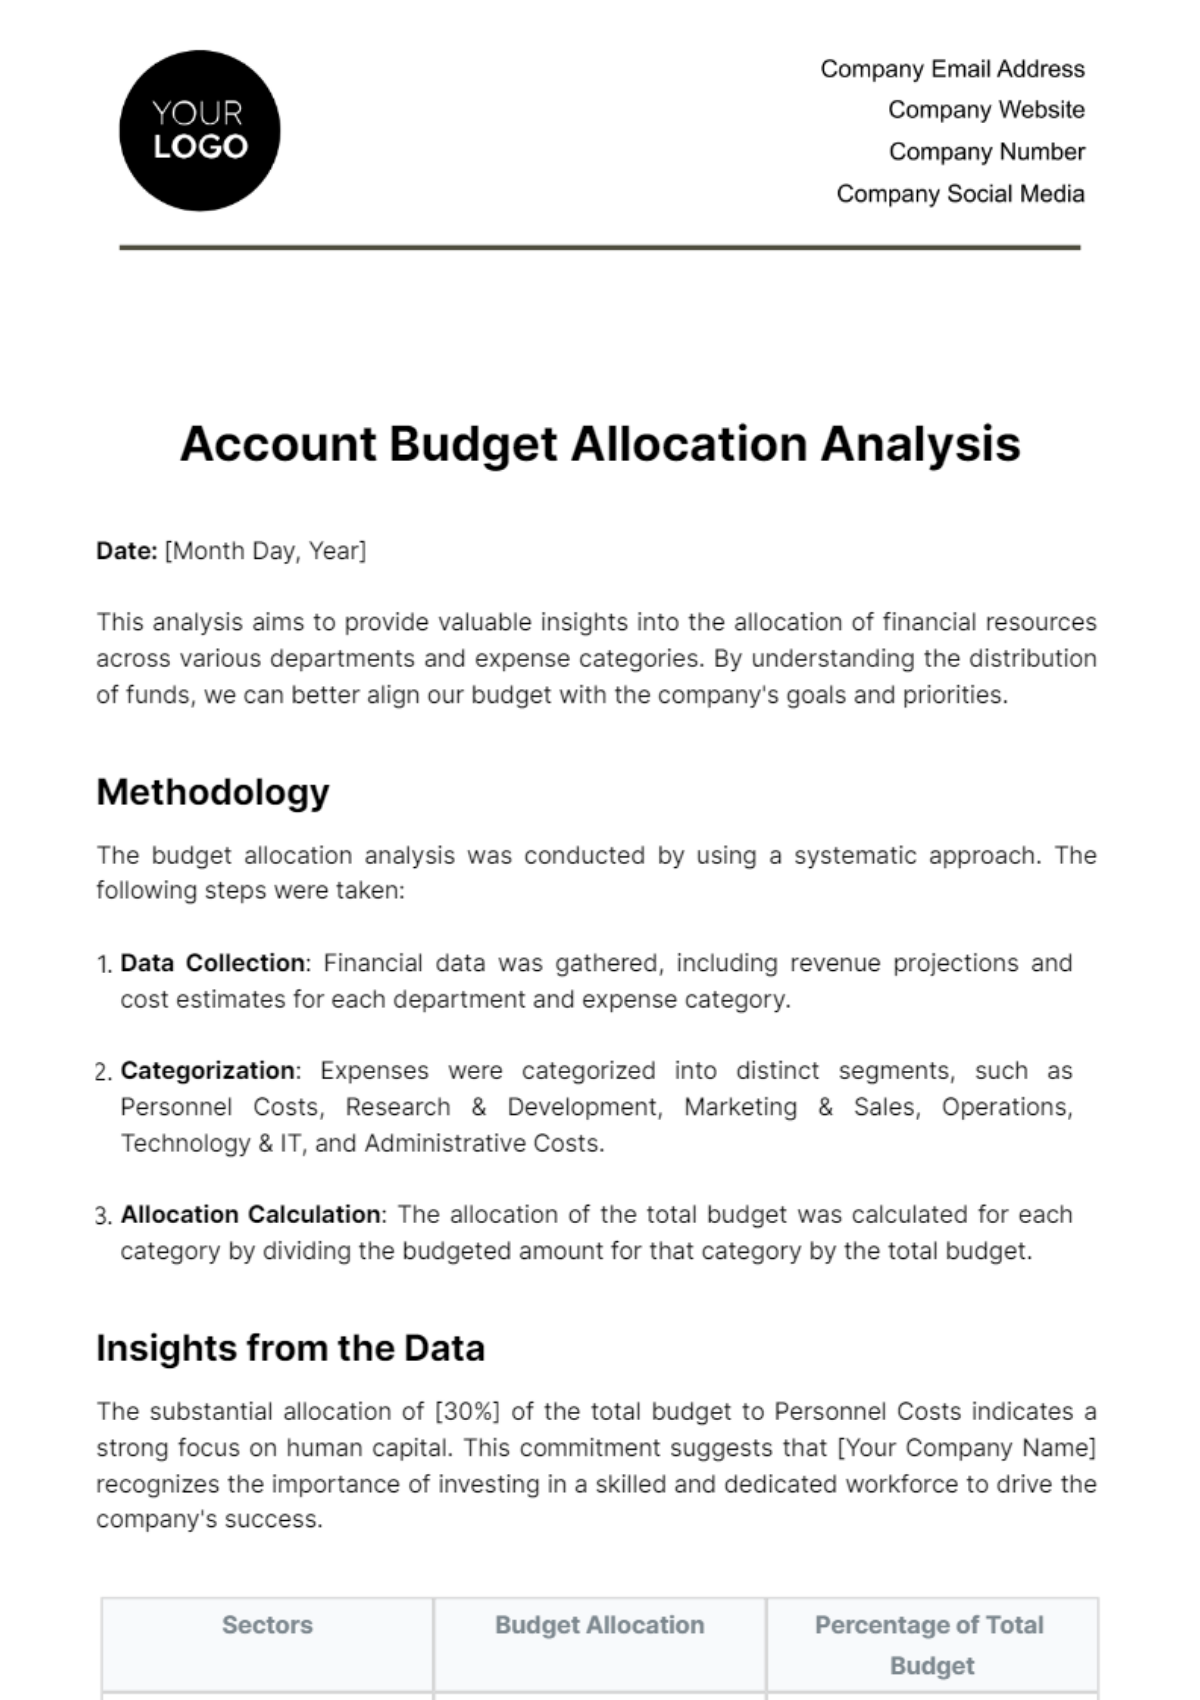 Account Budget Allocation Analysis Template